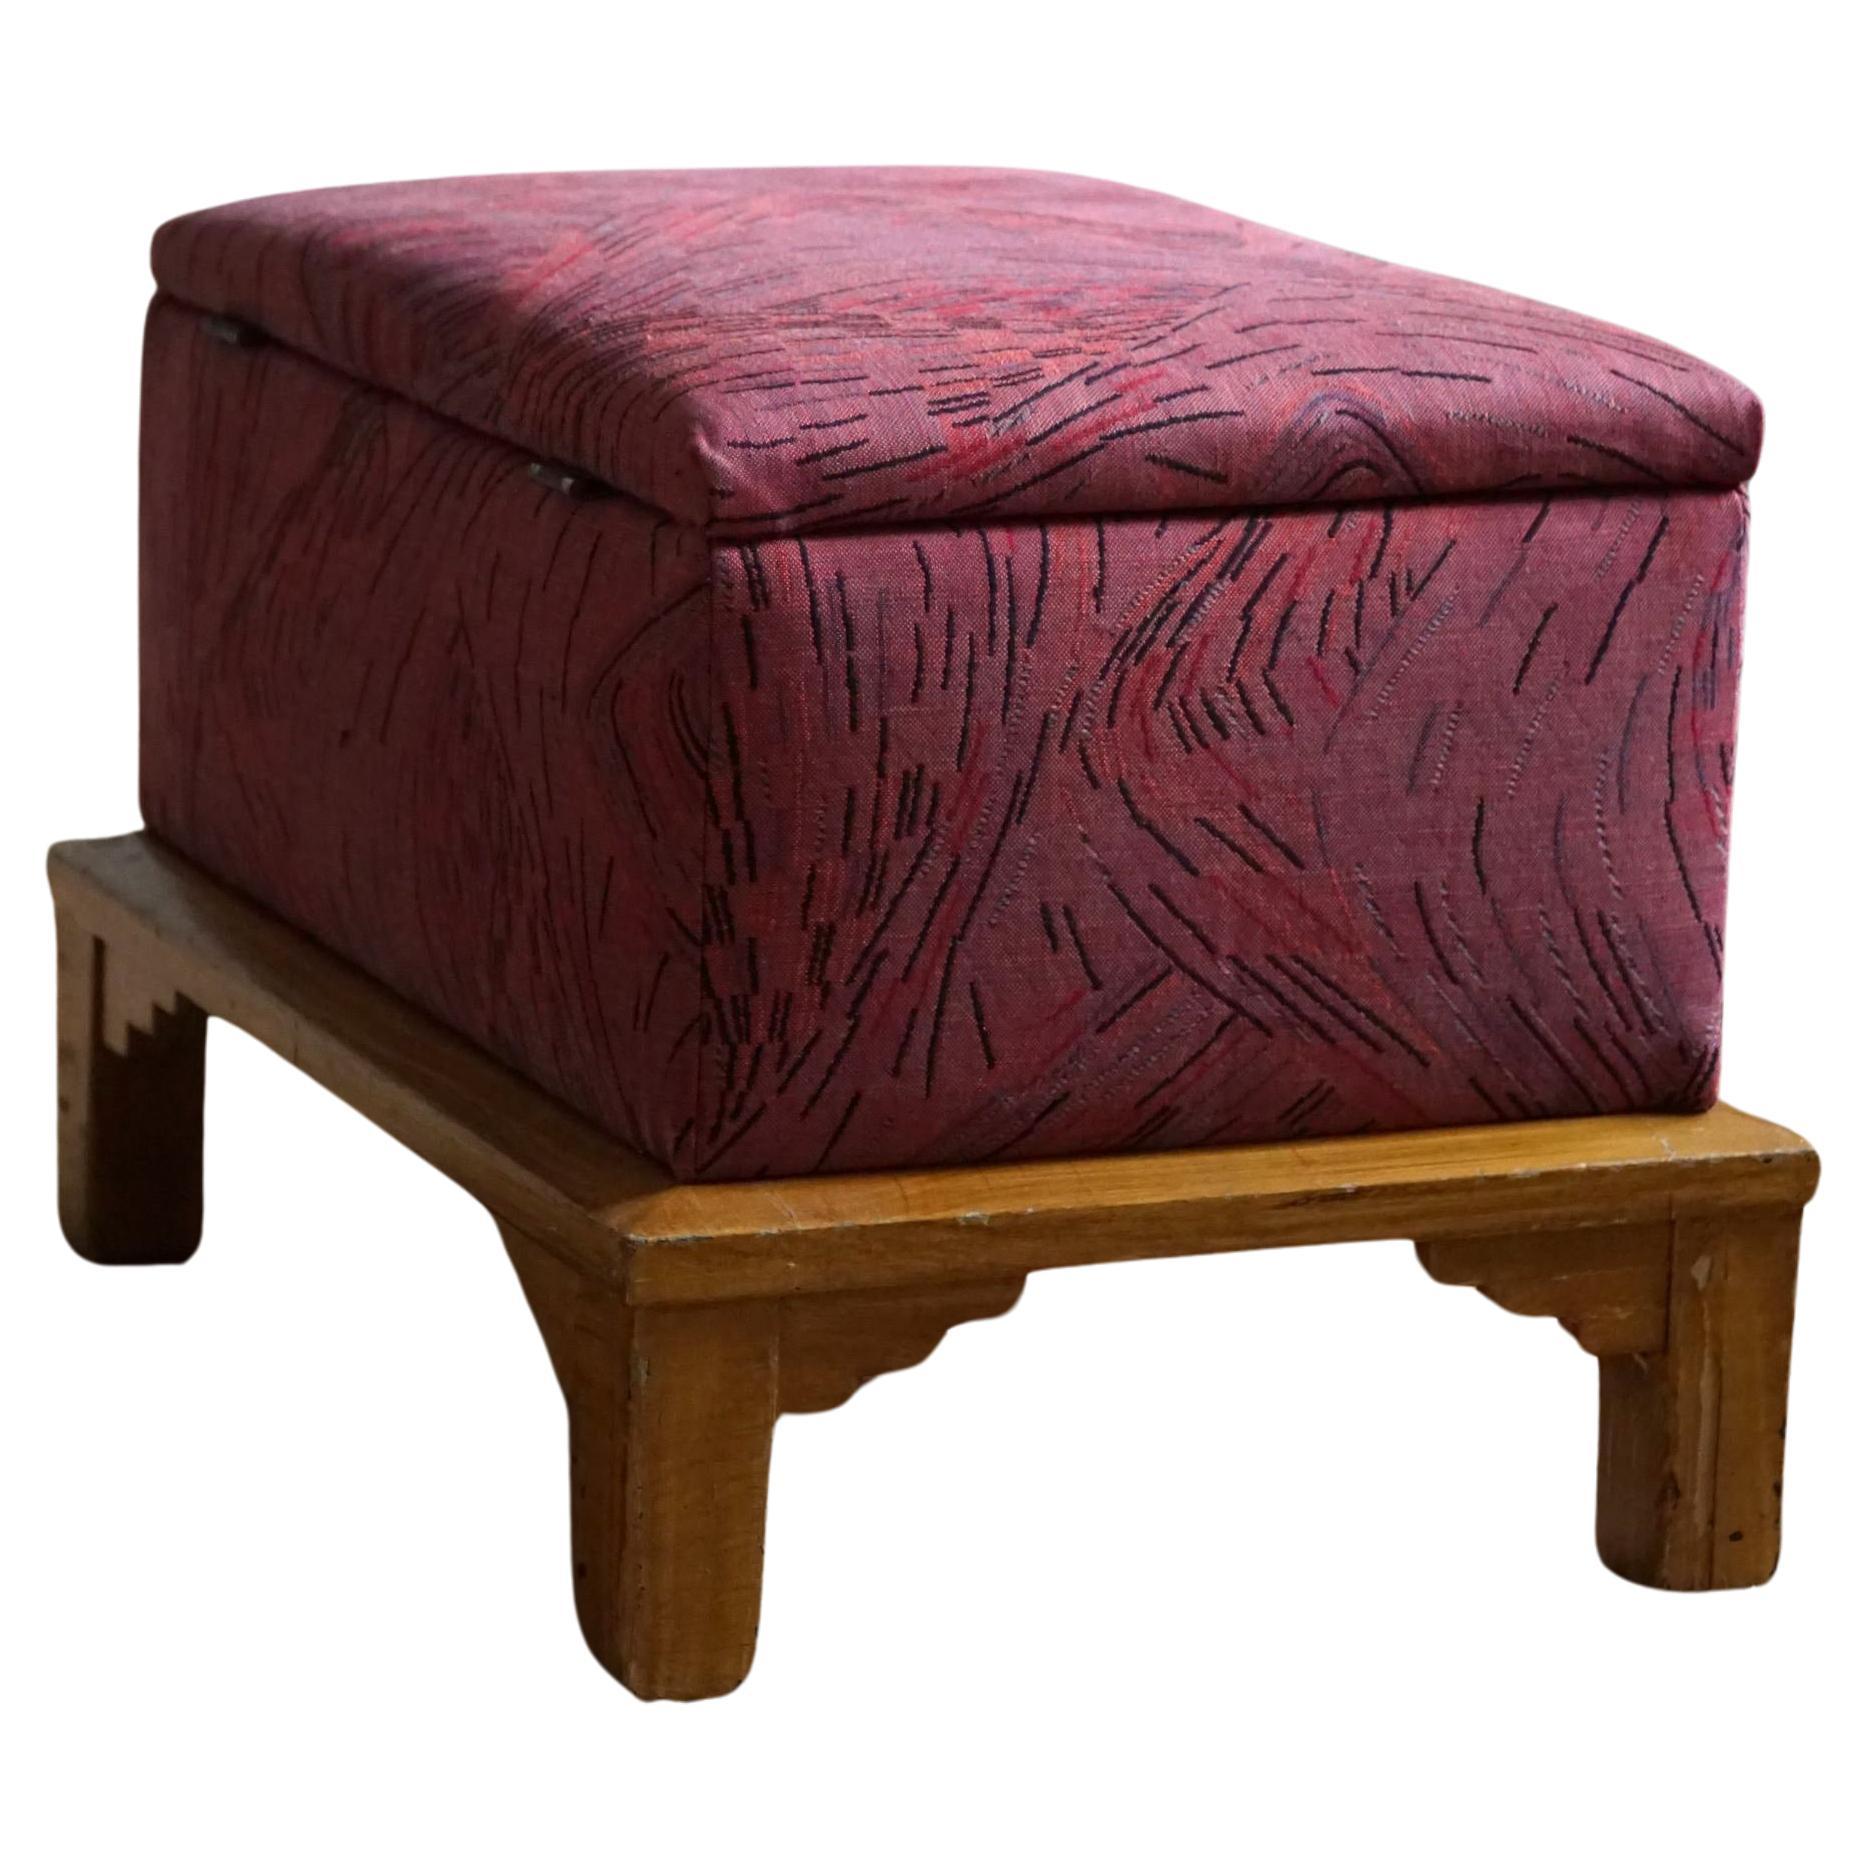 French Art Deco, Sculptural Stool with Storage, Reupholstered, Made in the 1940s For Sale